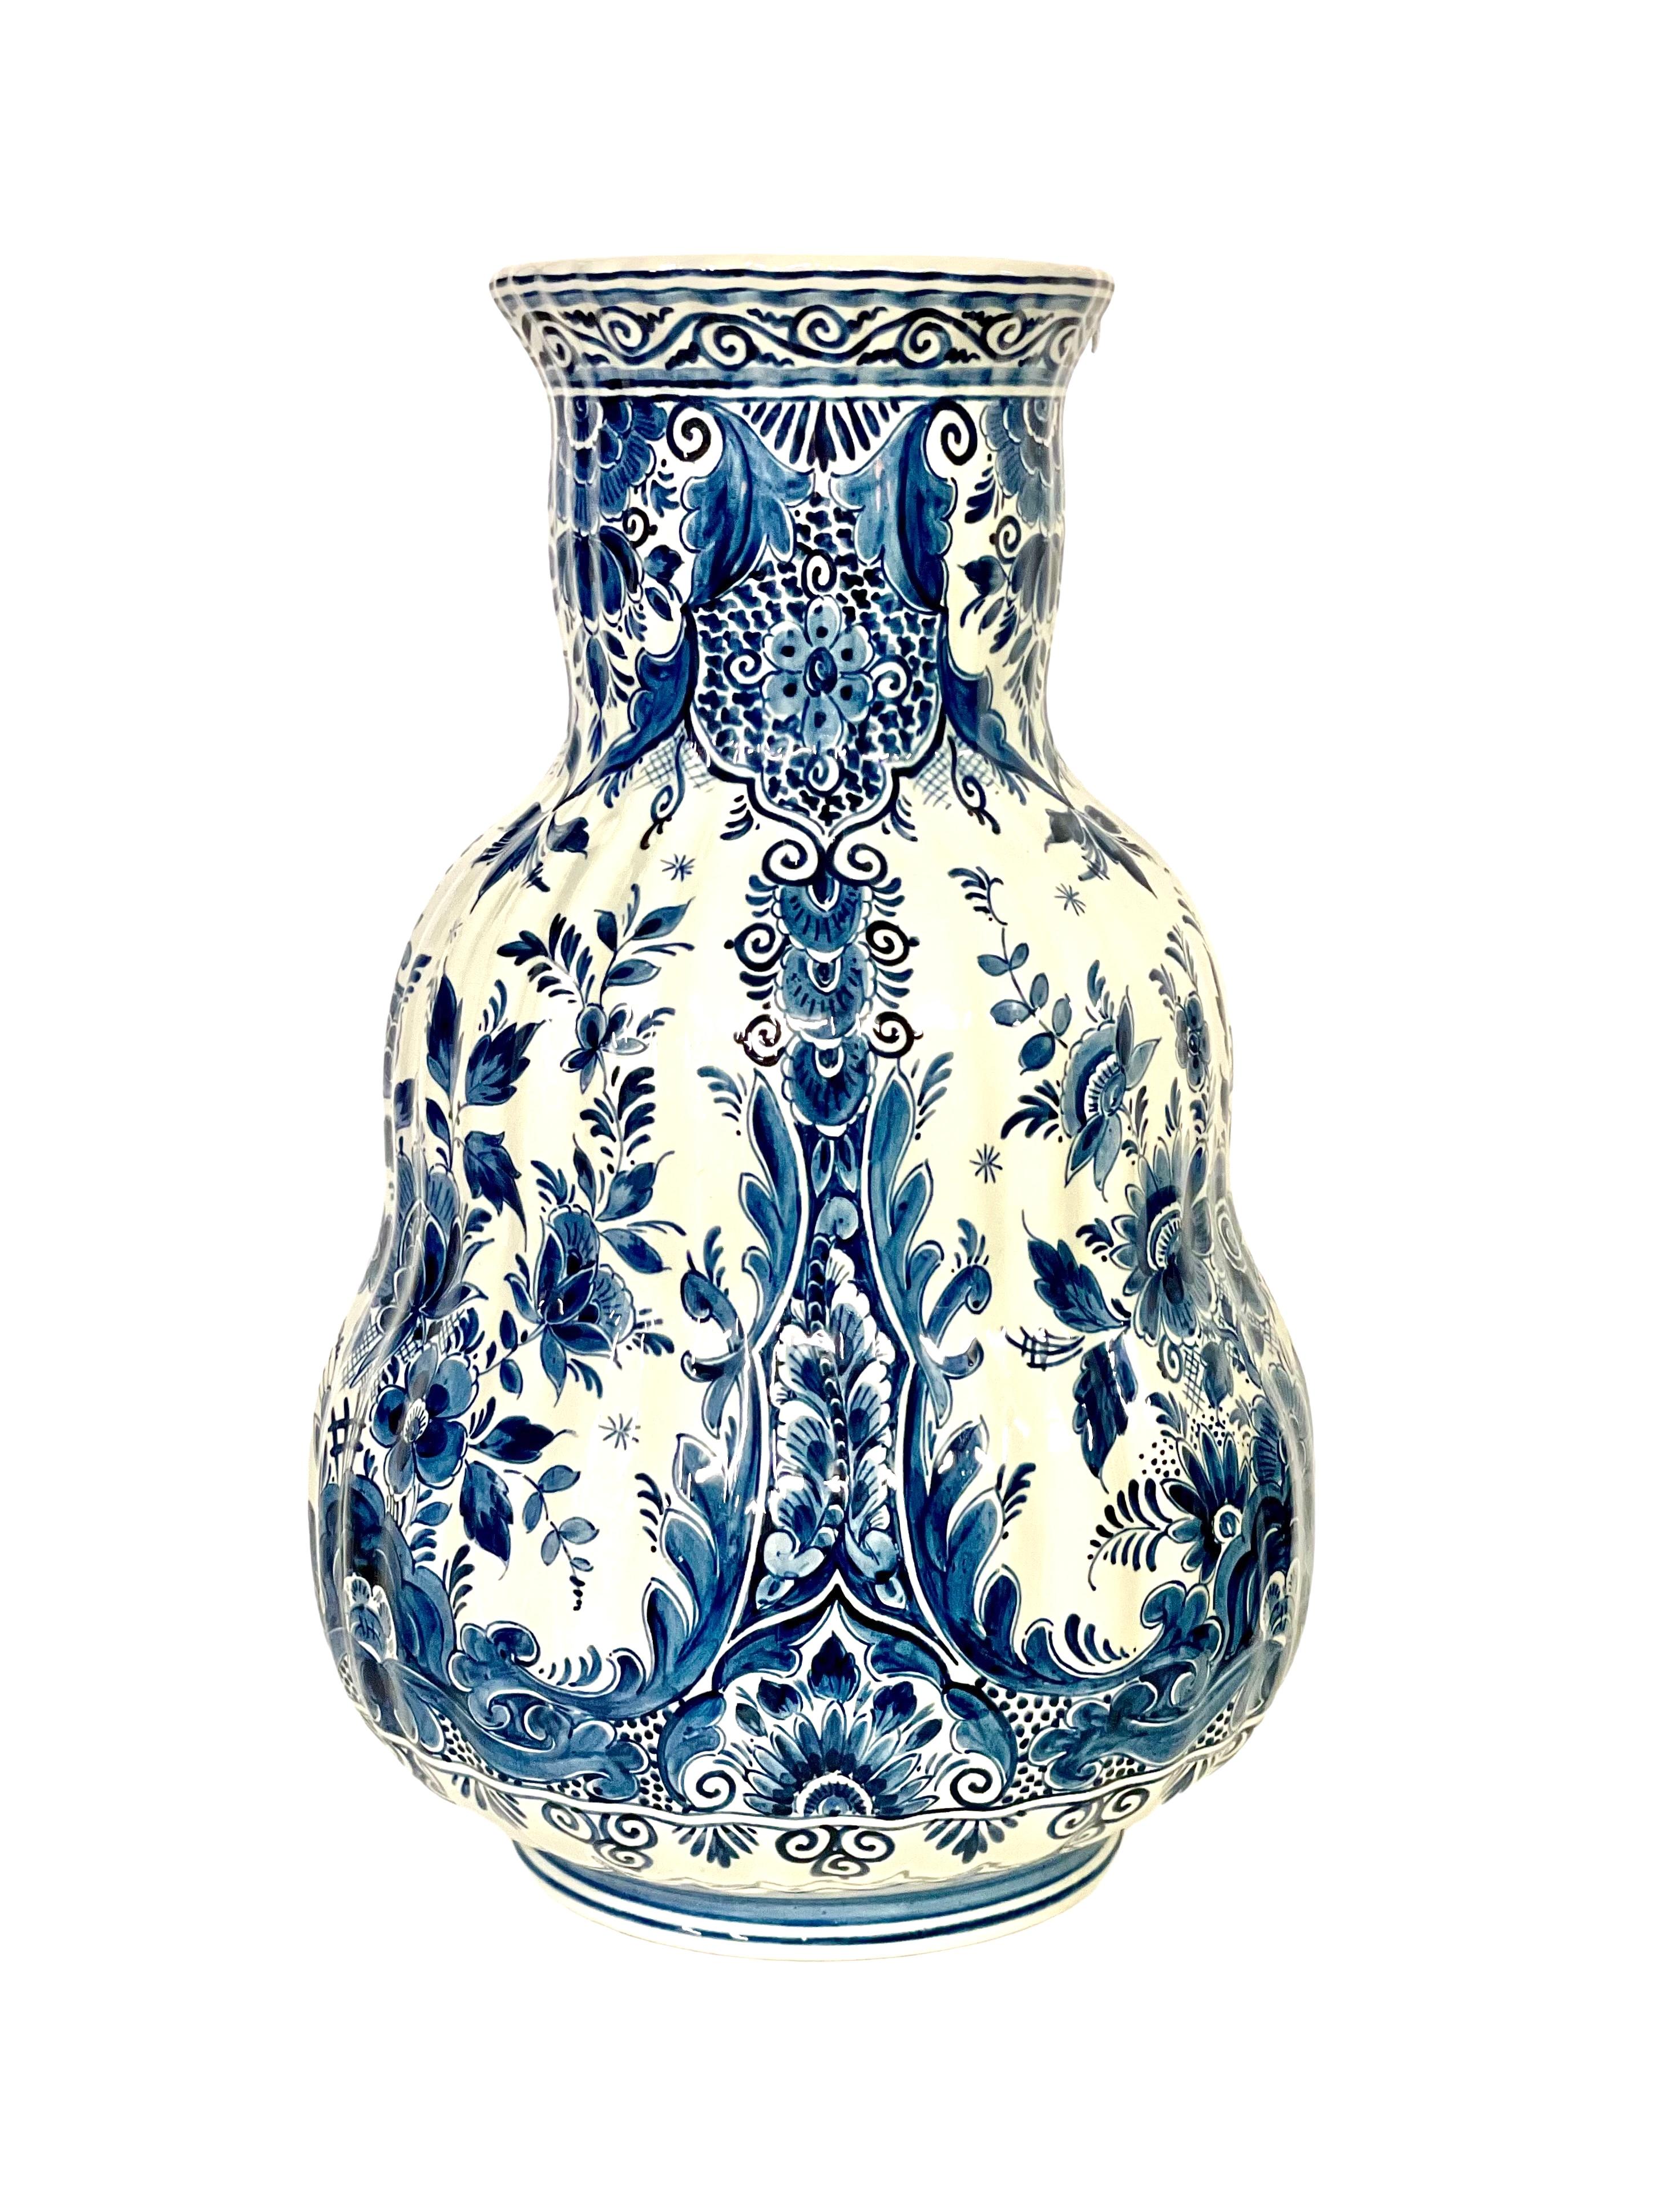 An exquisite Dutch Delft earthenware vase, hand-painted in a classic cobalt blue and white Chinoiserie design of scrolls, flowers and exuberant foliage. Tall in height, this statuesque vase has a curvaceous ribbed and pear-shaped body, which tapers